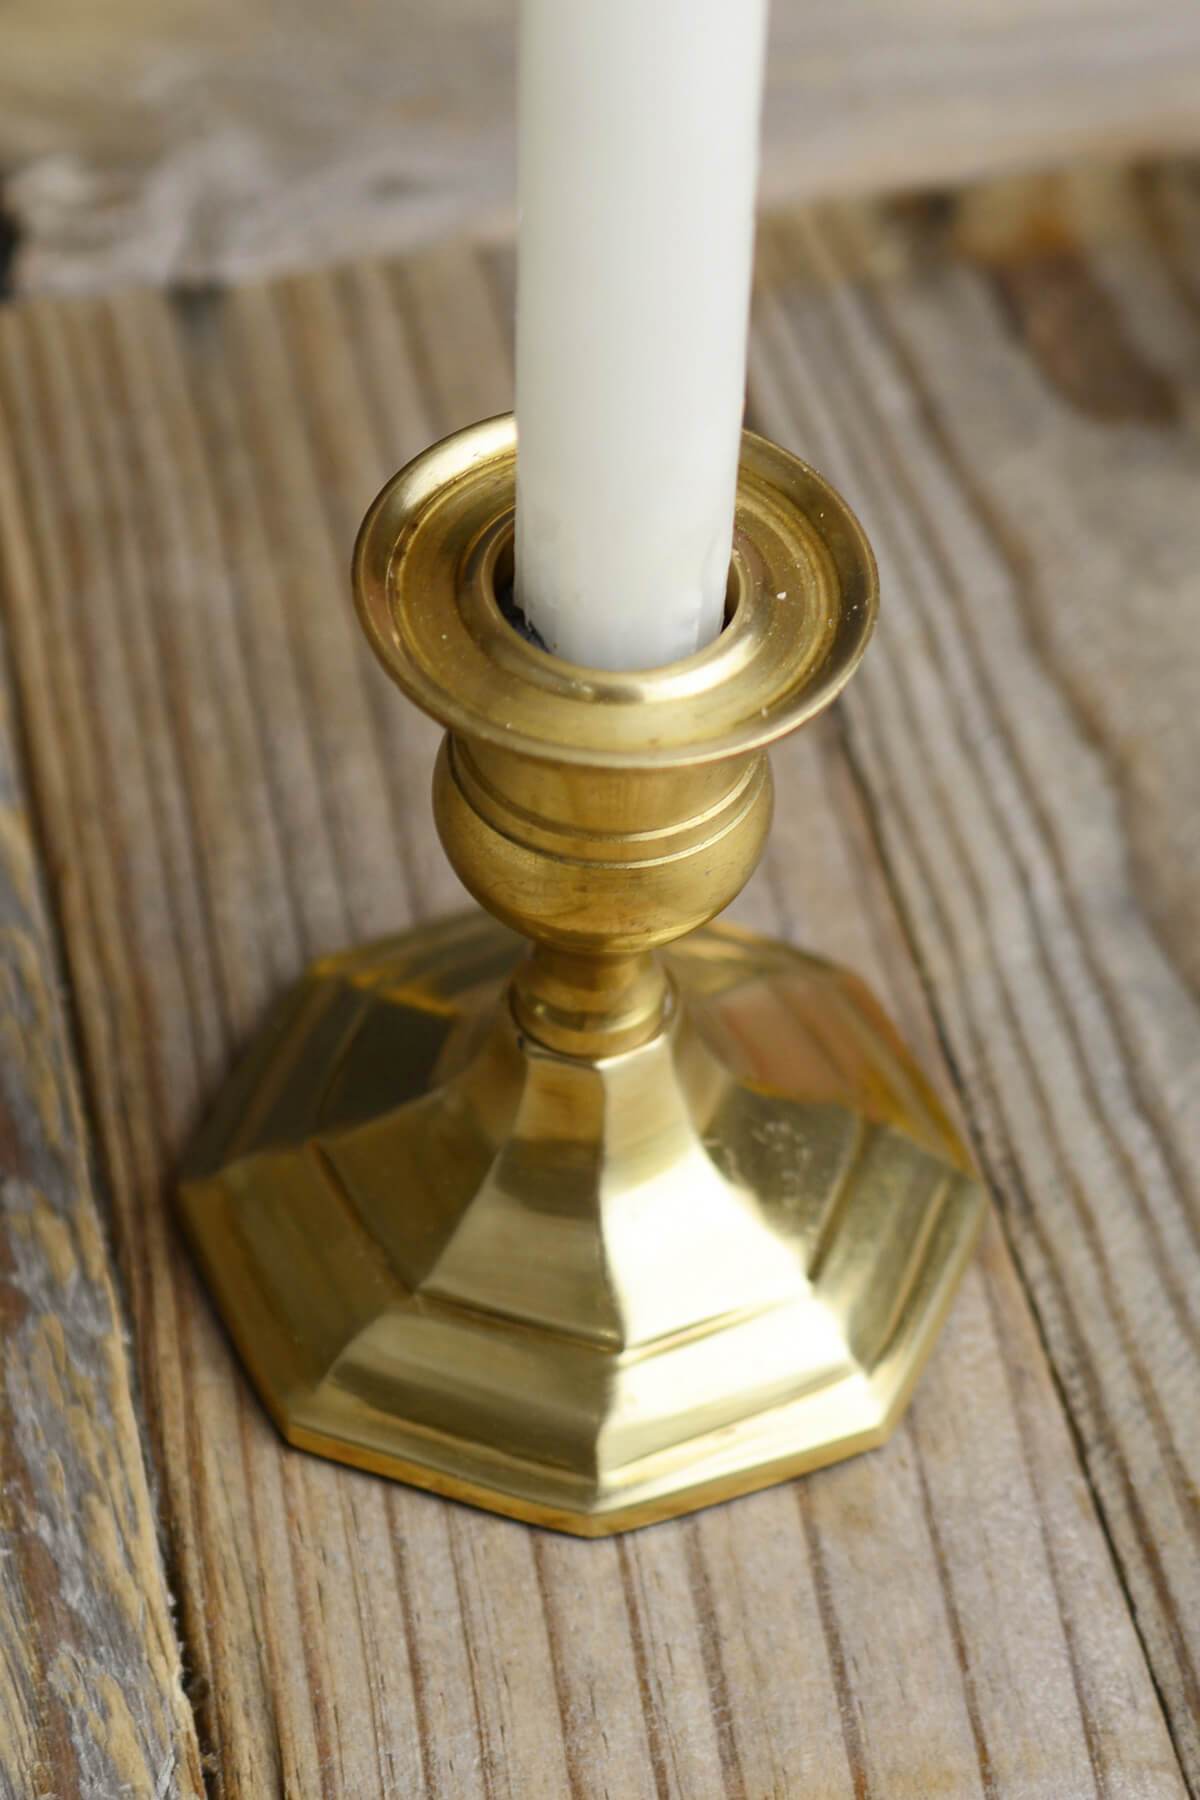 Gold Metal 3.75 Taper Candle Holder, Antique Candlestick - Quick